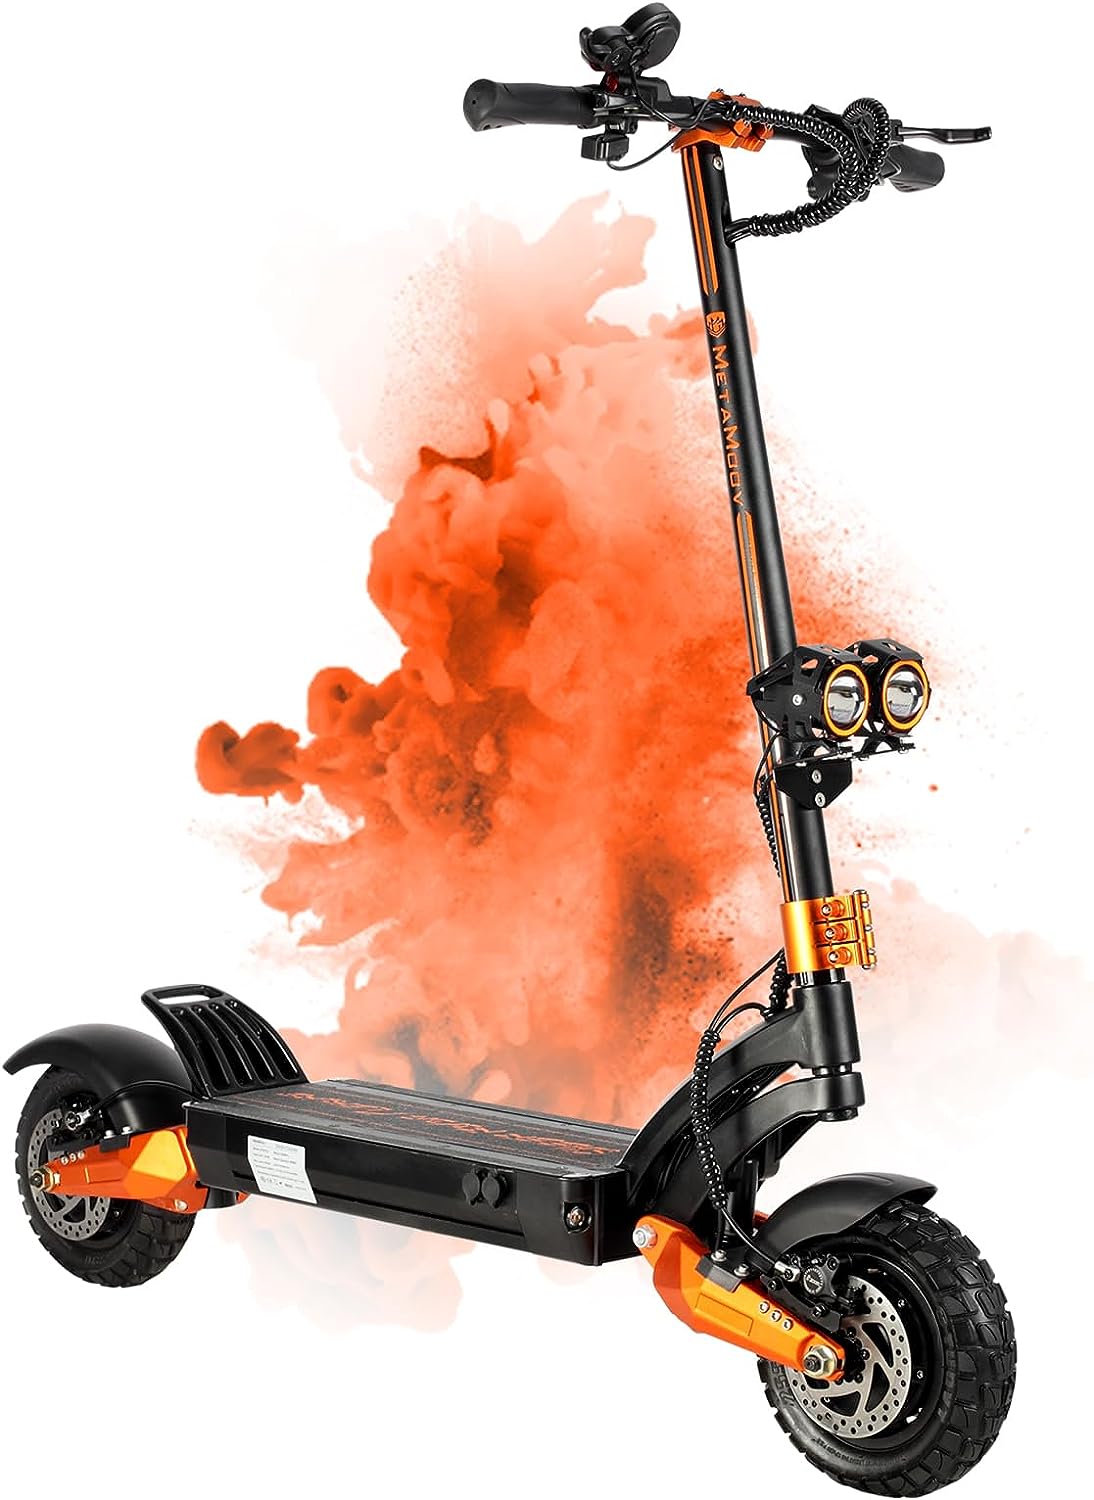 Off Road, Extreme high power scooter with full suspension